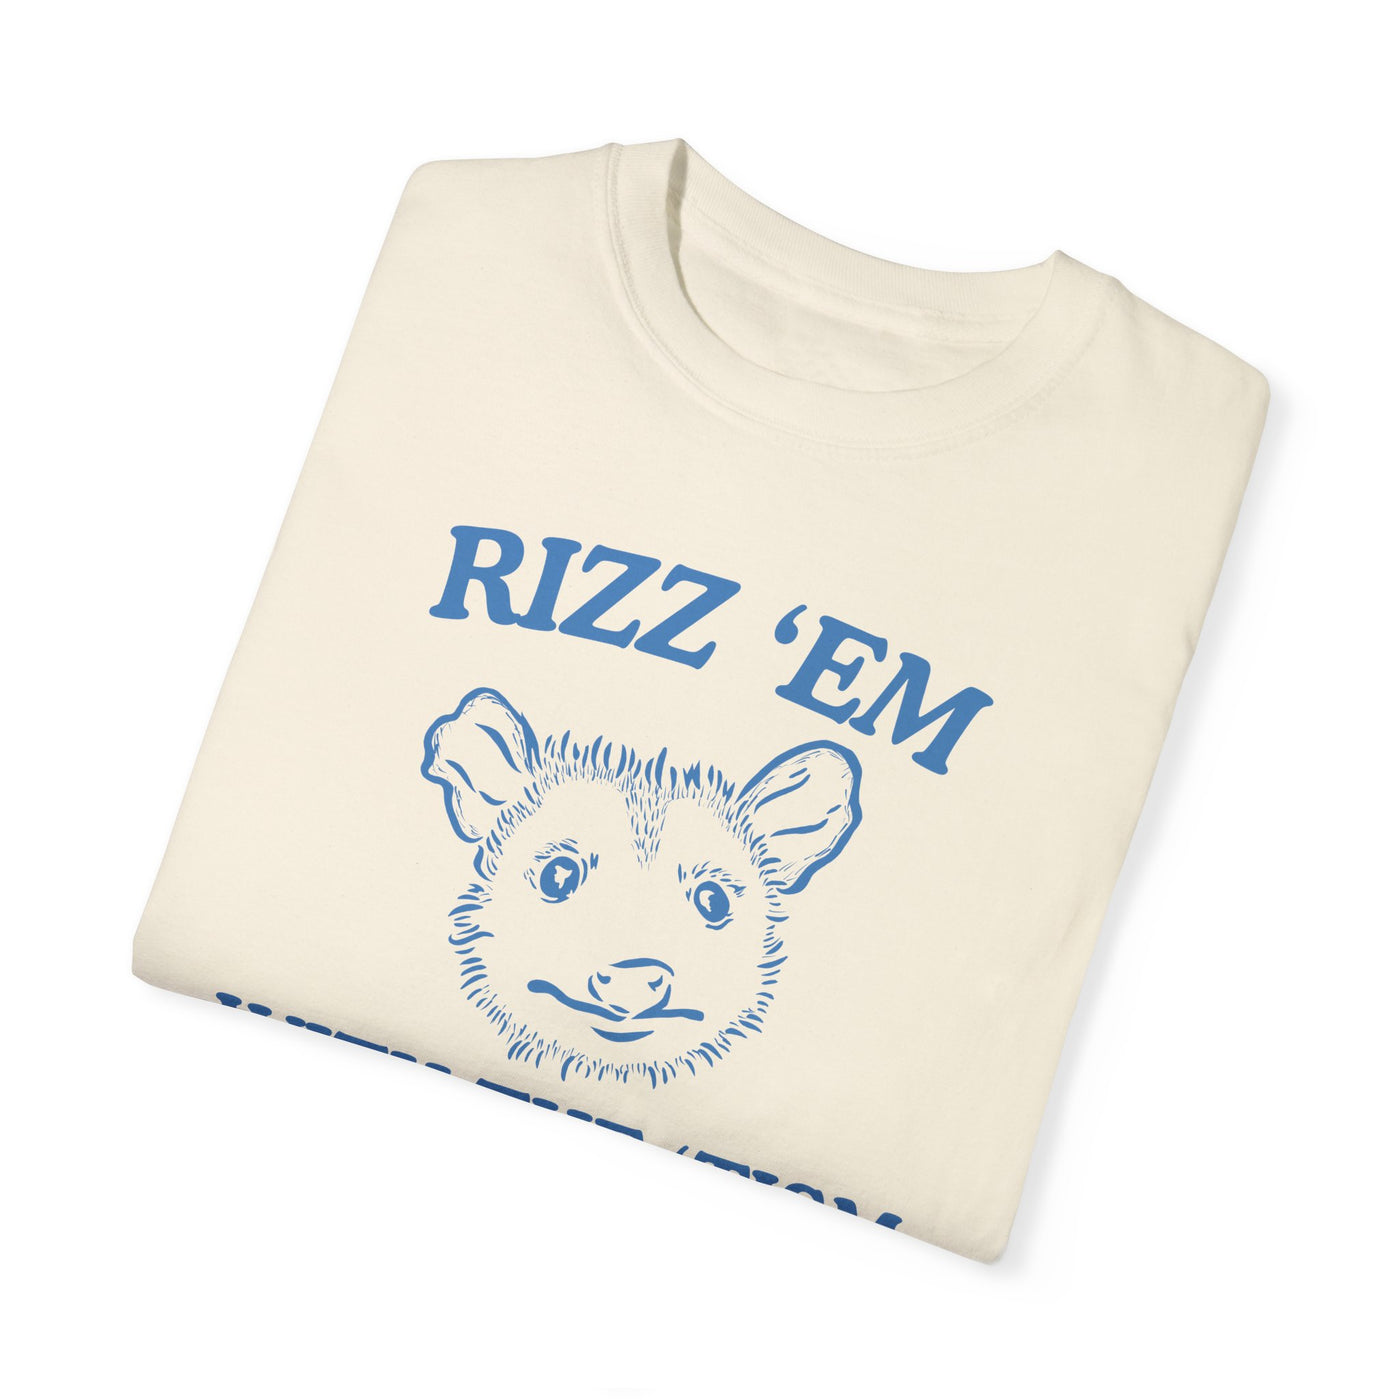 Rizz 'Em With The 'Tism- Comfort Colors